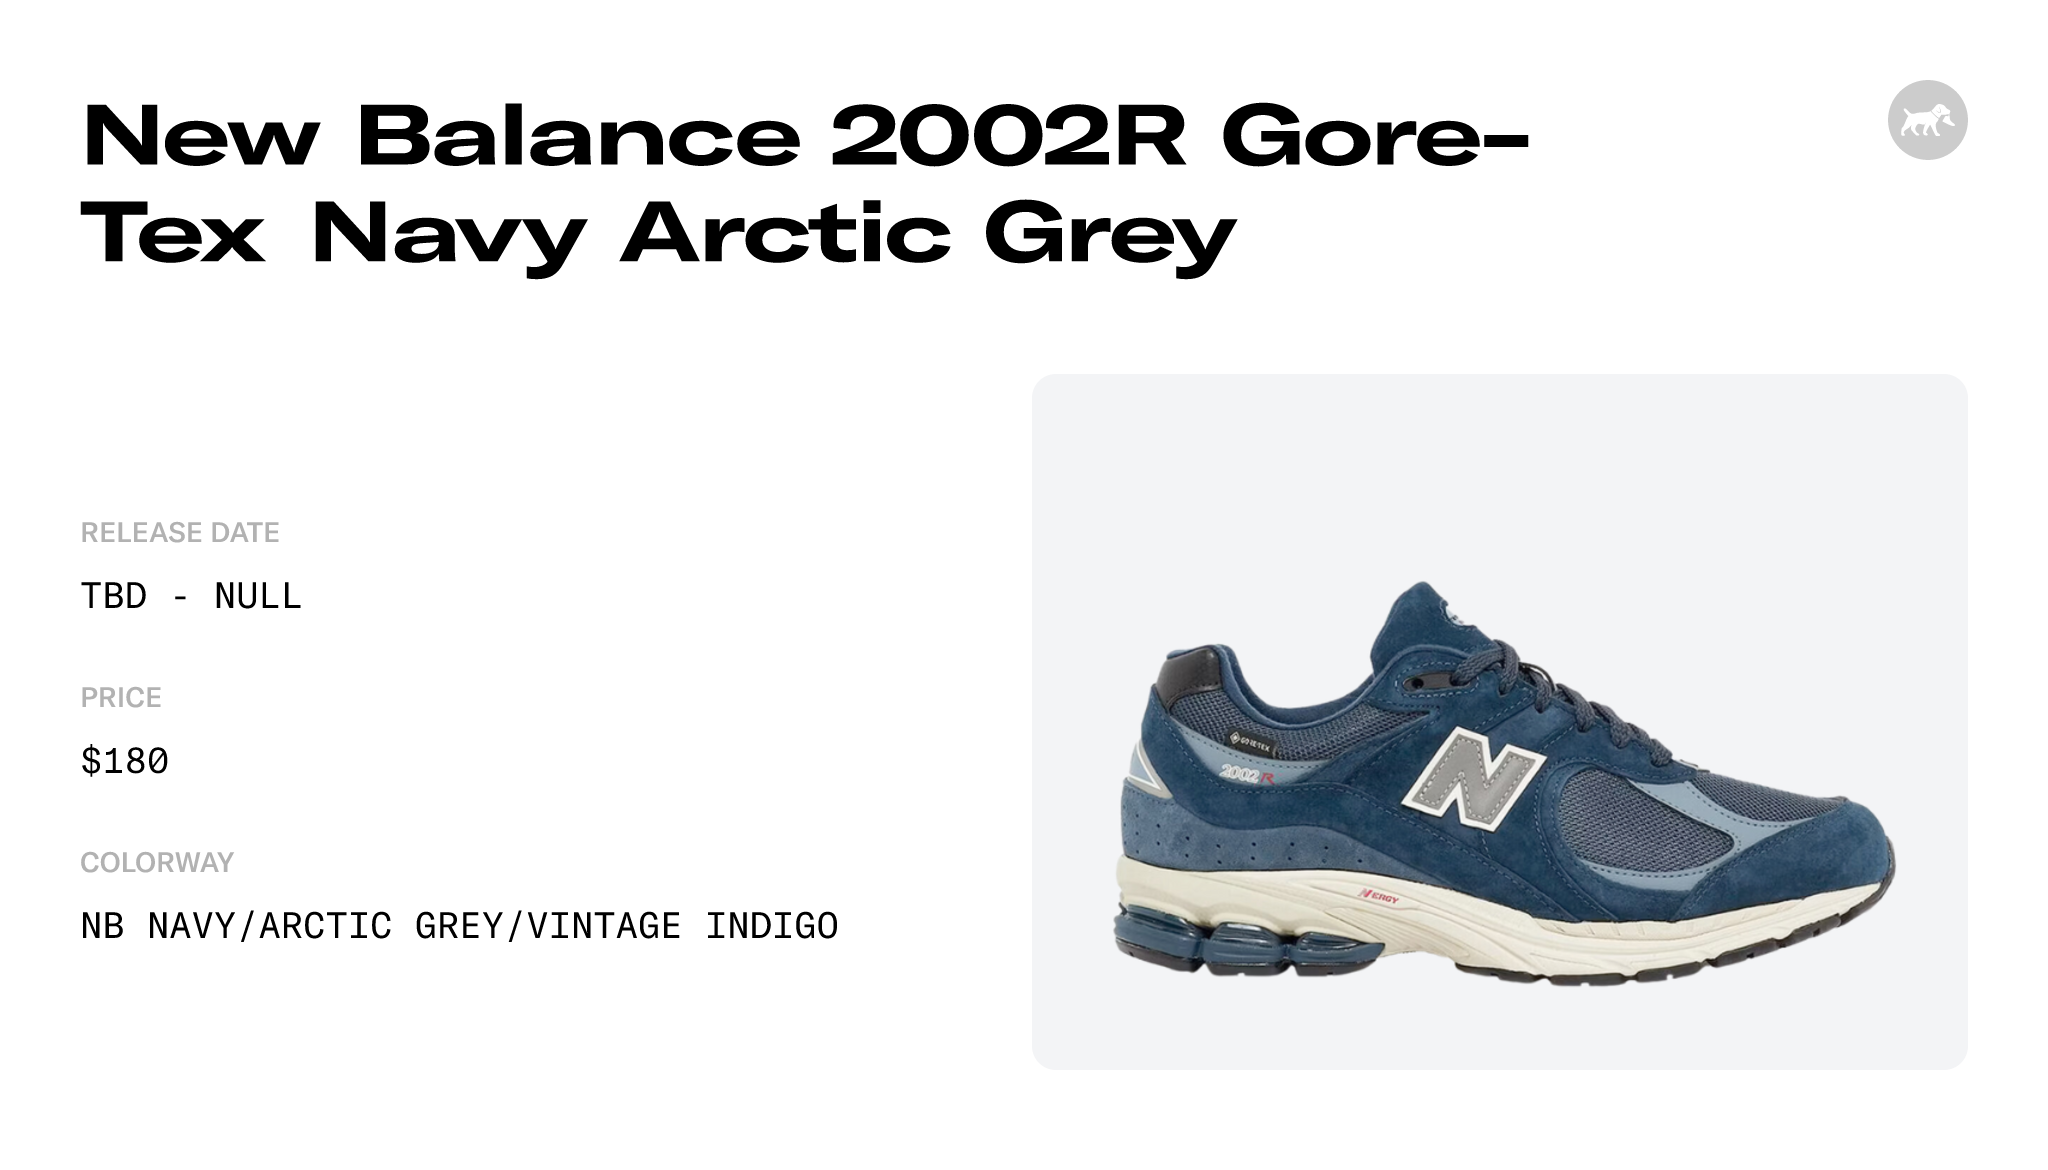 New Balance 2002R Gore-Tex Navy Arctic Grey - M2002RXF Raffles and Release  Date